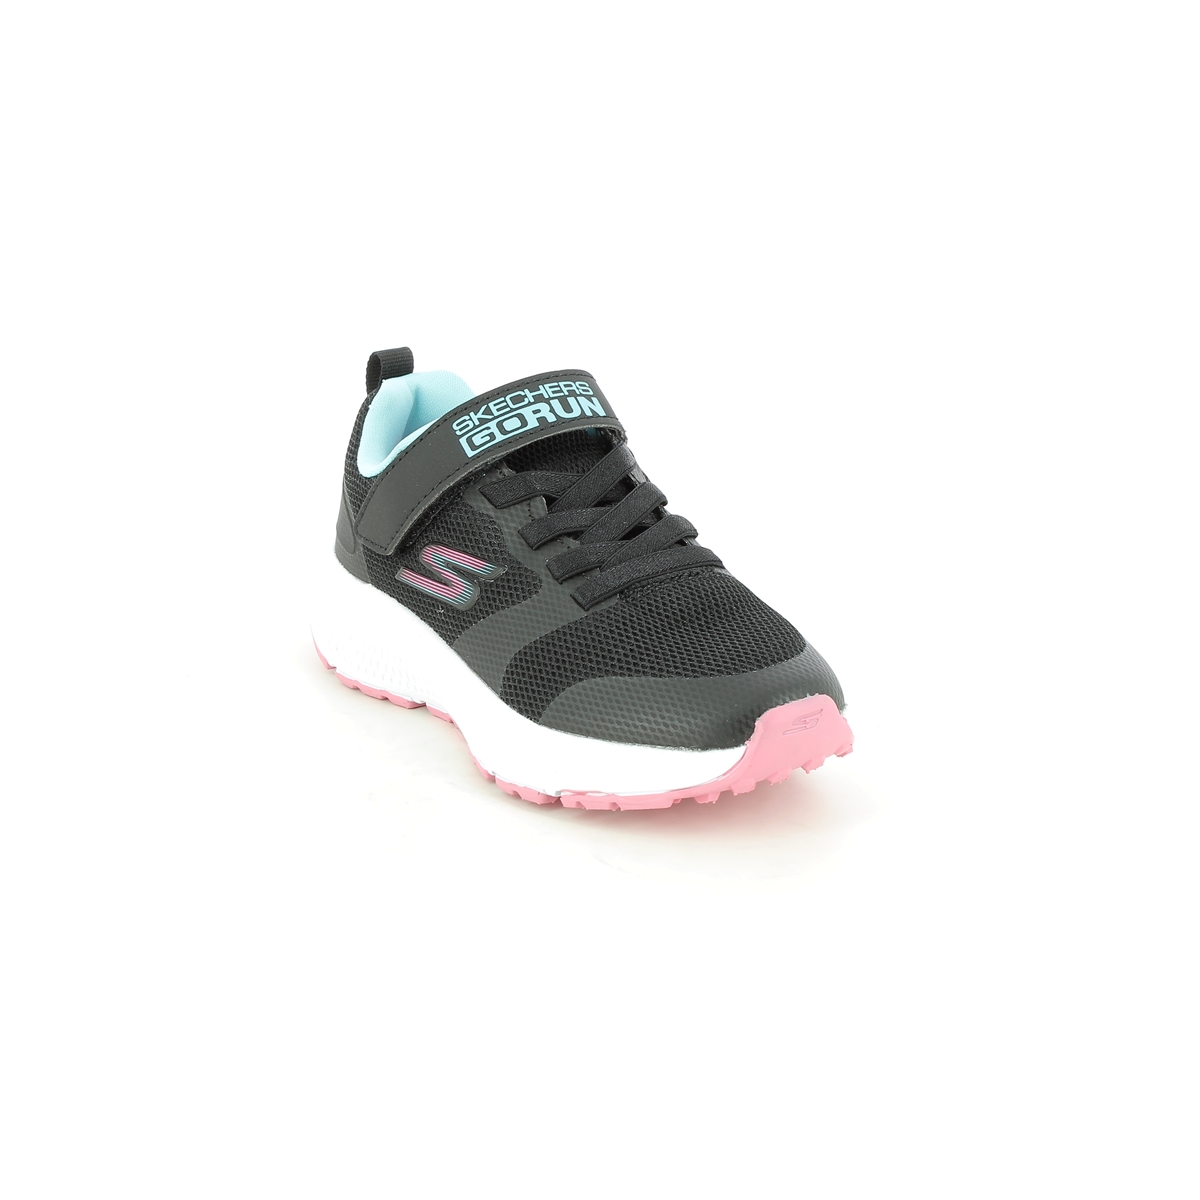 Skechers Go Run Consistent BLK Black Kids girls trainers 302409L in a Plain Man-made in Size 27